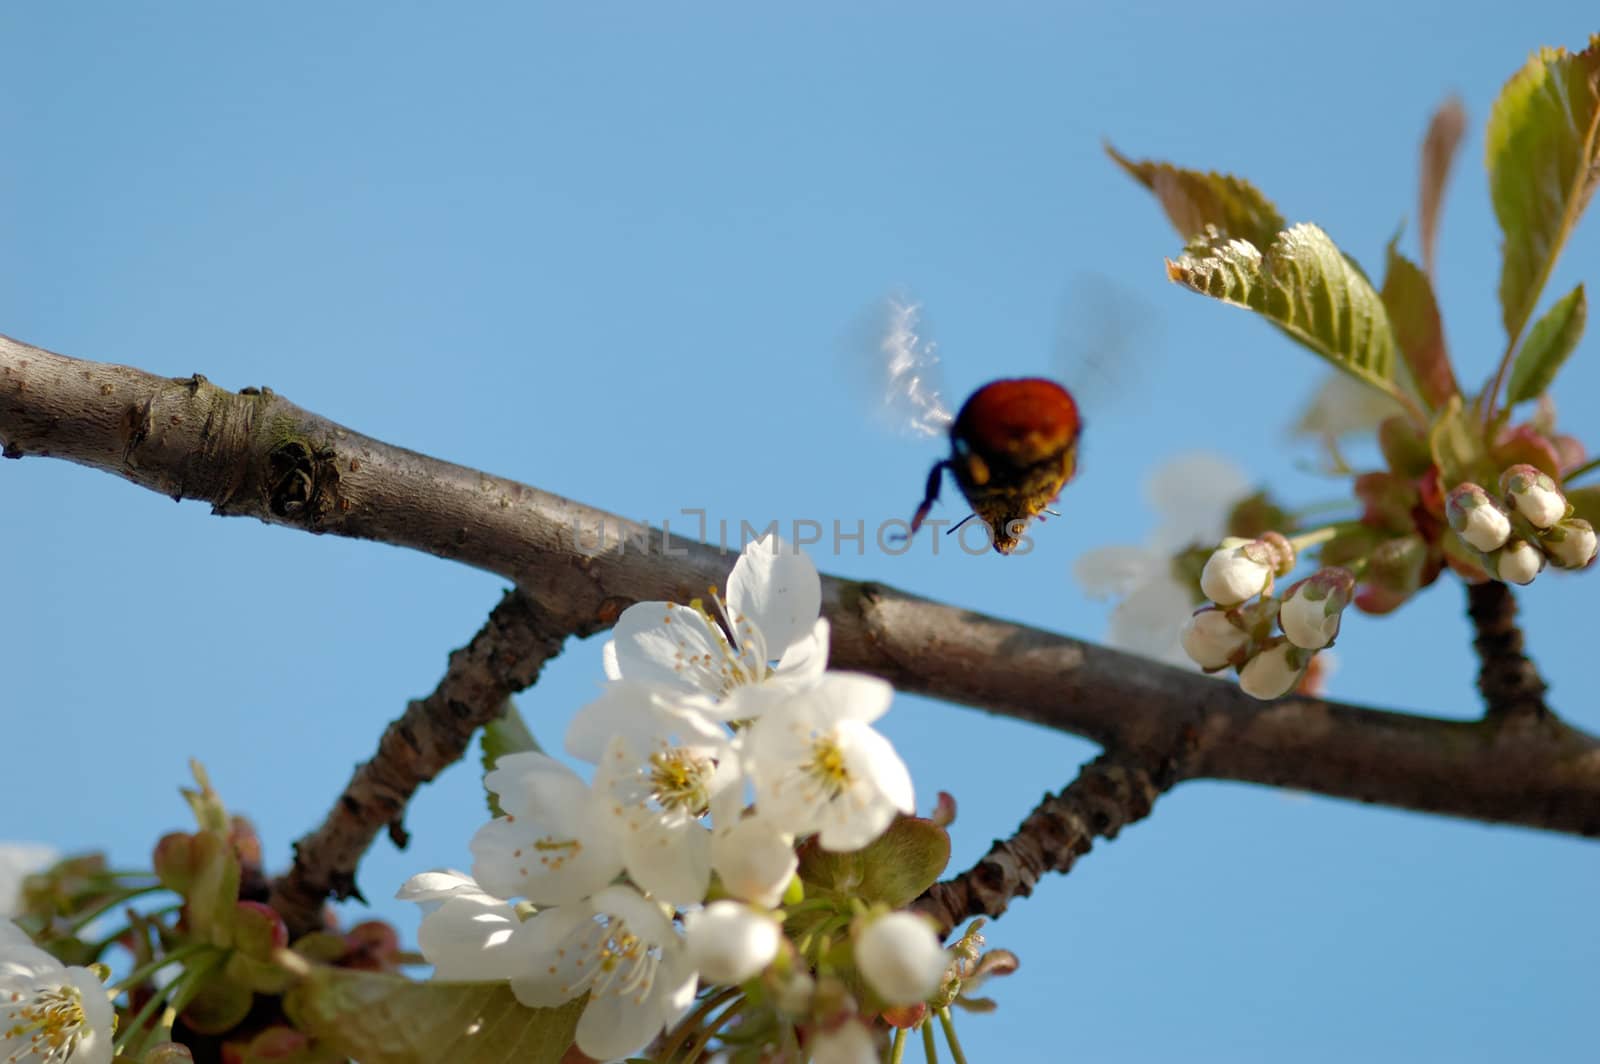 1:1 macro shot of a bumblebee from behind, flying from a cherry blossom, flozen in mid-flight. Shallow DOF with focus on the insect's snout.
